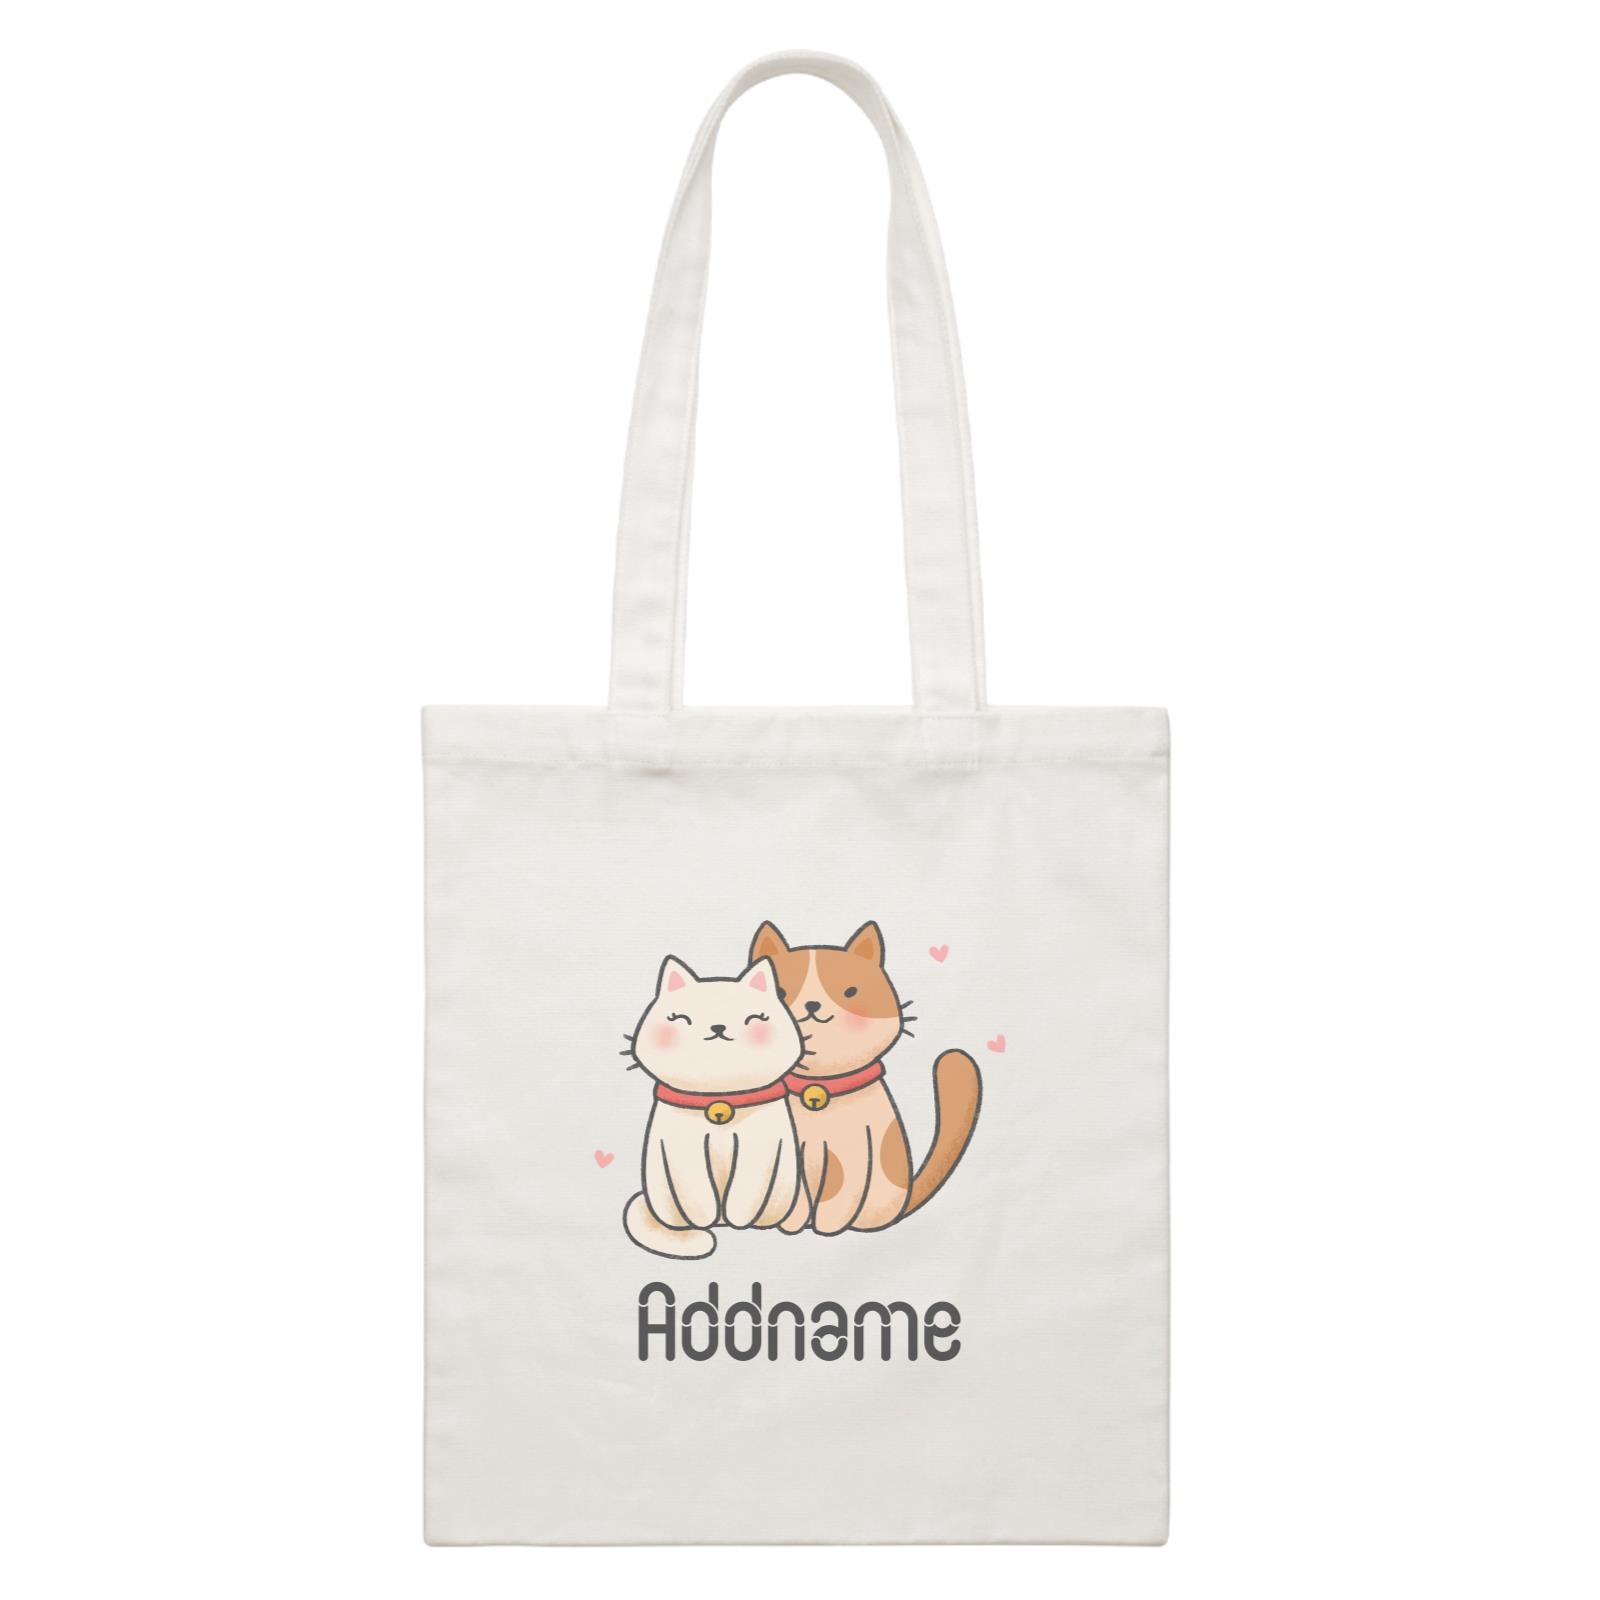 Cute Hand Drawn Style Couple Cat Addname White Canvas Bag